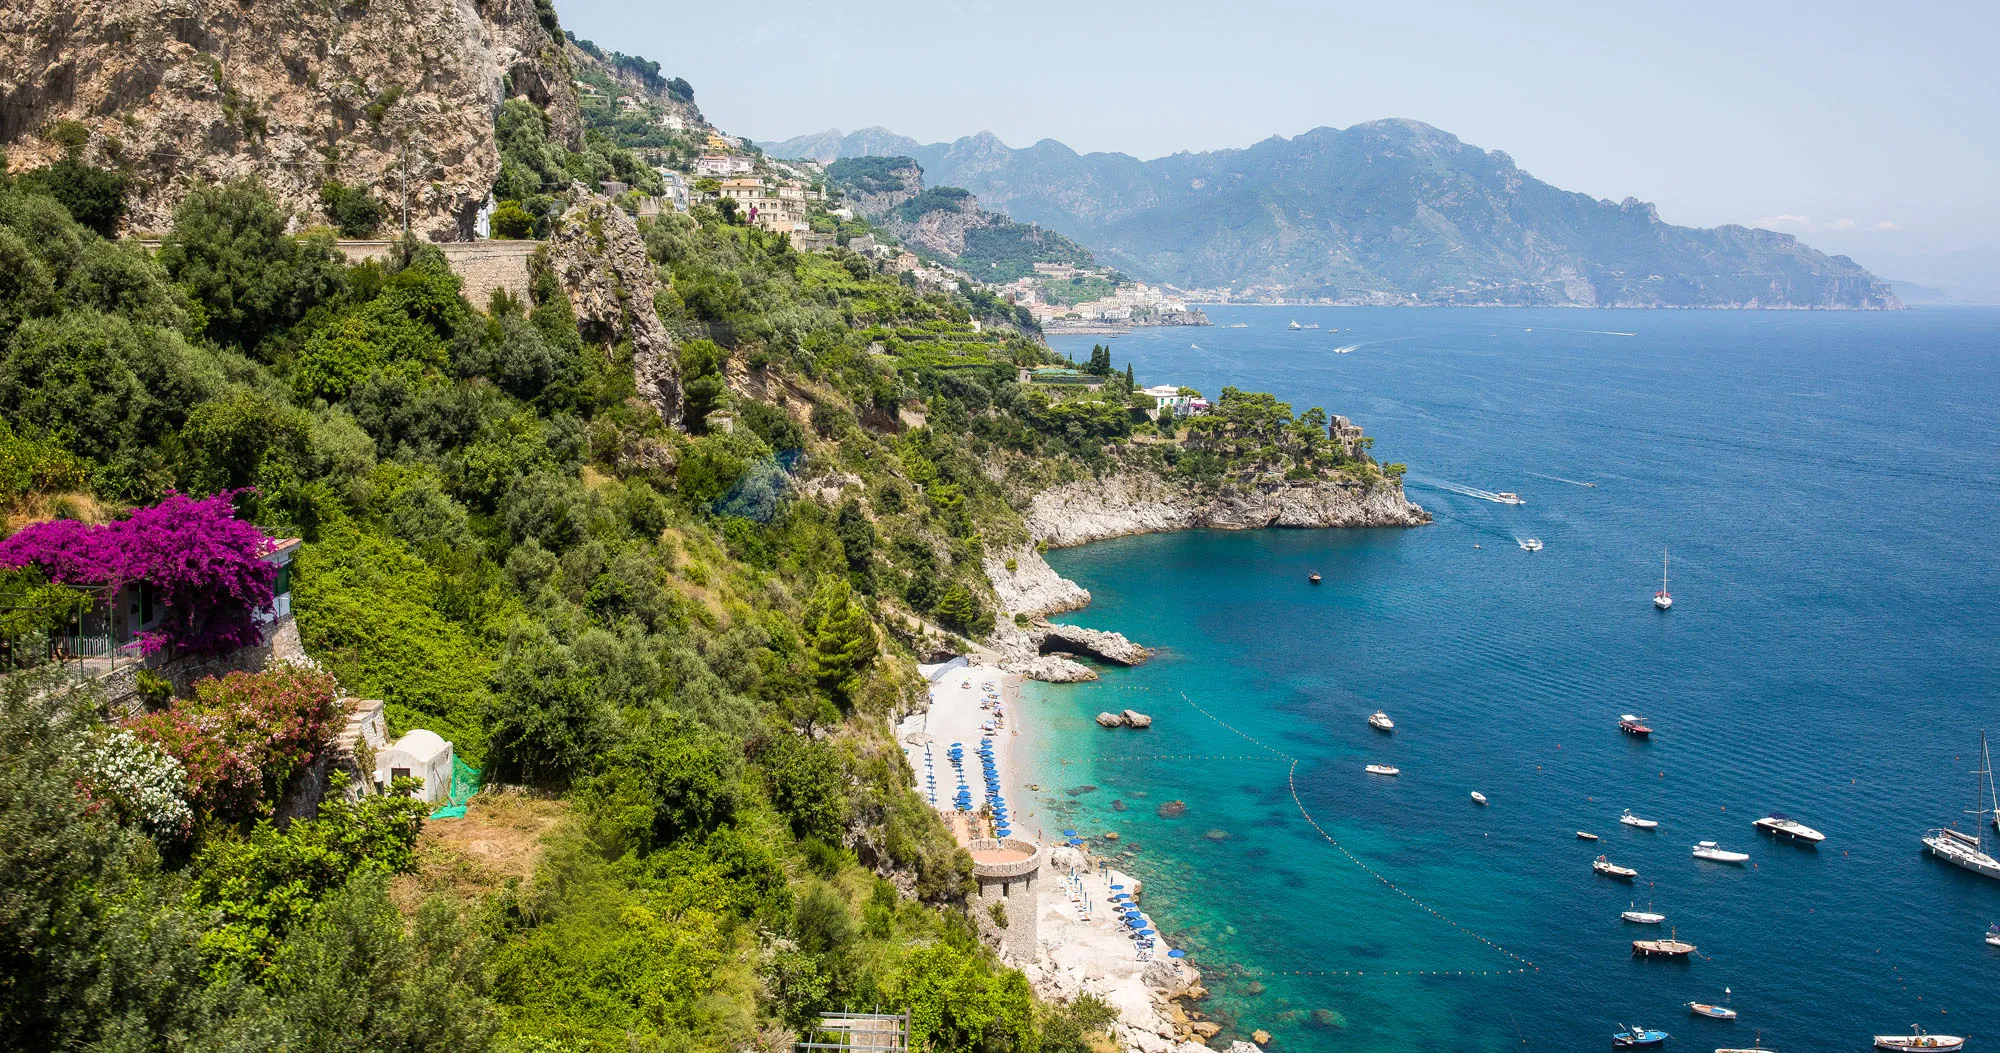 Featured image for “Best Way to Get Around the Amalfi Coast: Car, Bus, Boat, or Tour”